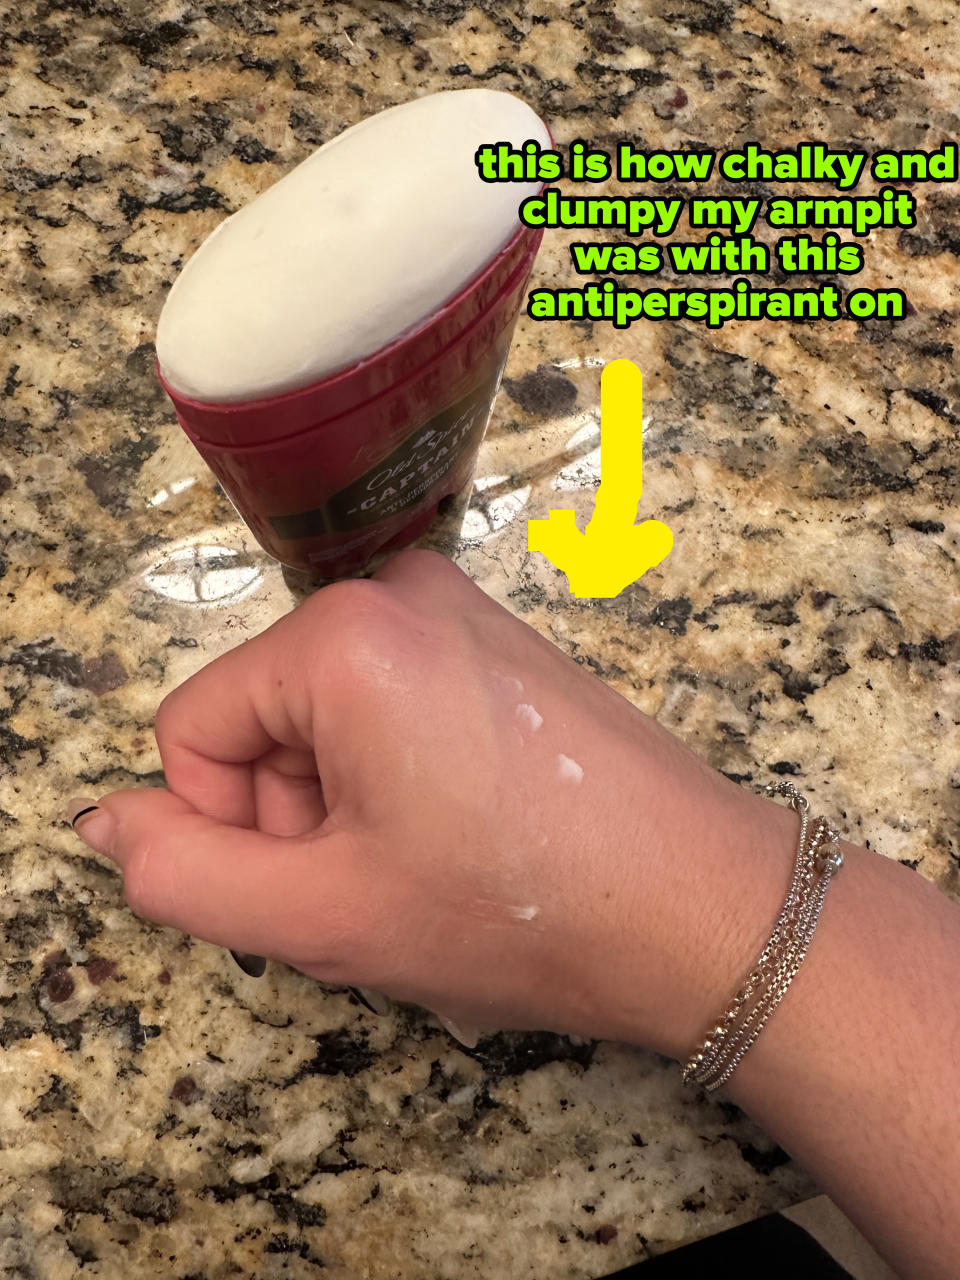 the clump of applied deodorant on the author's hand